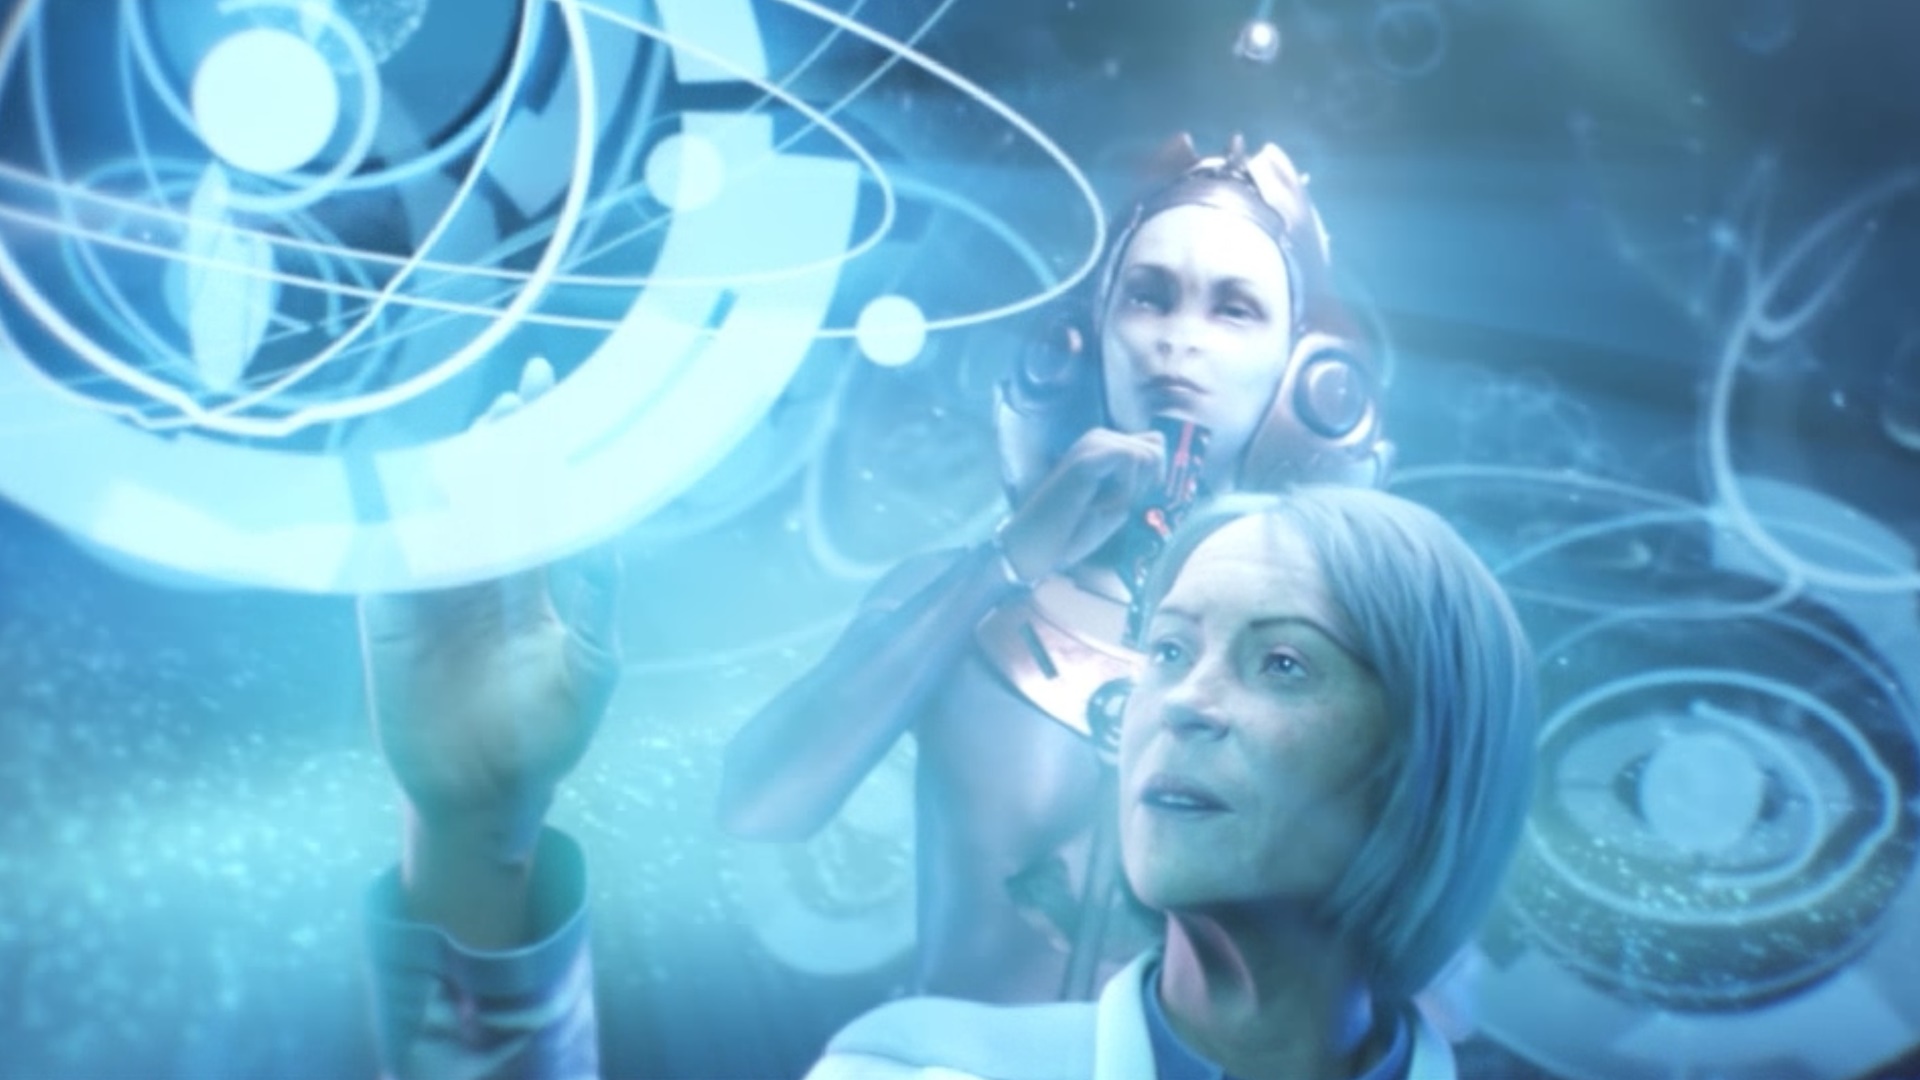 Halo 4: Spartan Ops screenshot of Dr. Halsey and the Librarian with the Janus Key